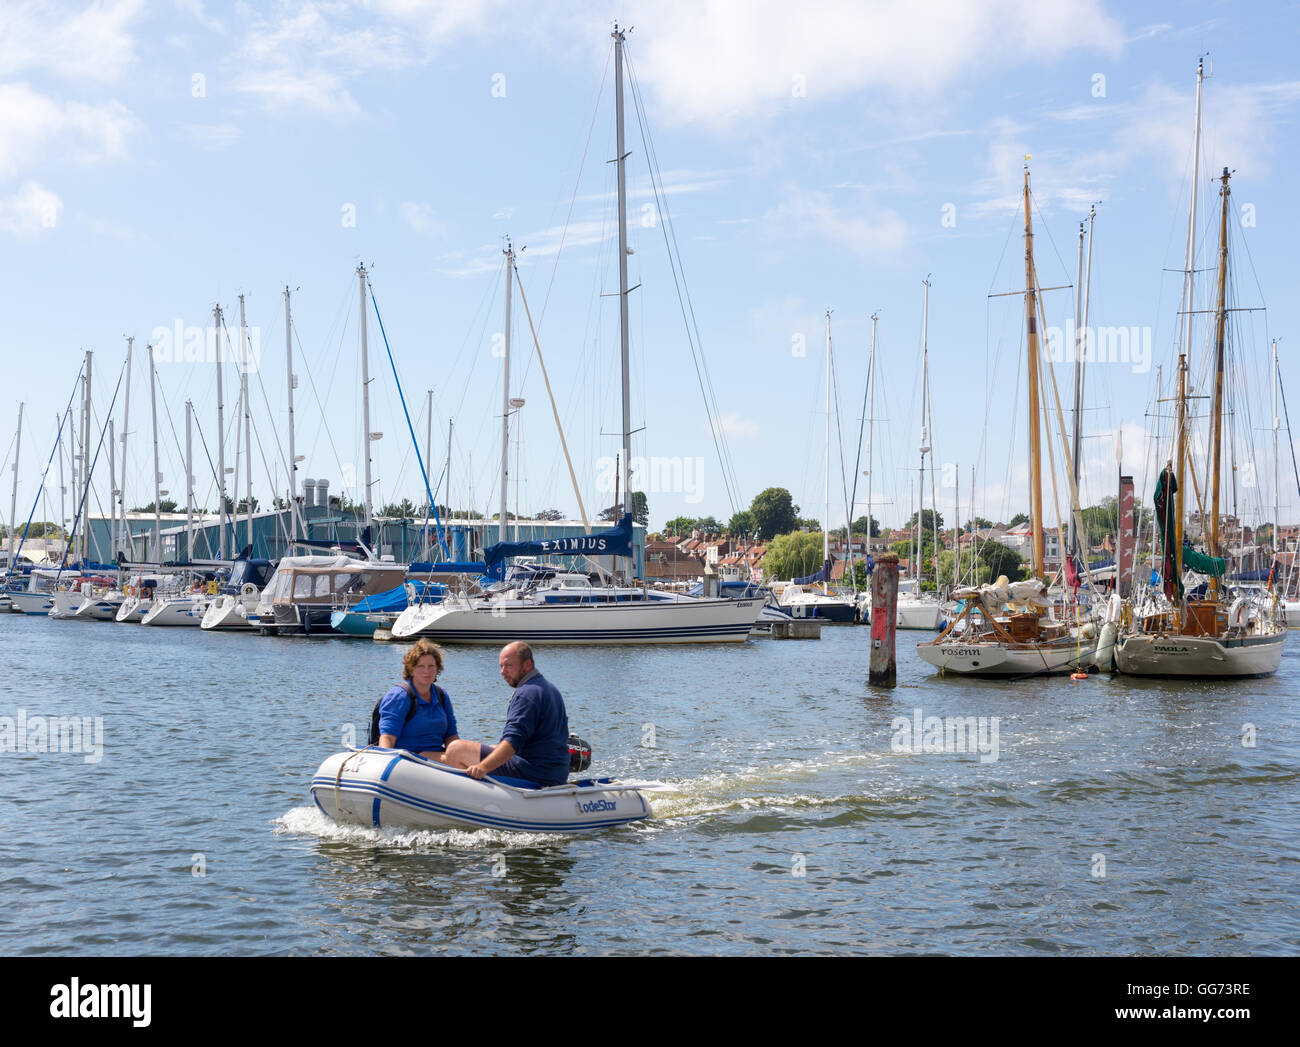 A couple use a dinghy to get to their off-shore moored boat in the sunshine at Lymington Hampshire UK. Stock Photo